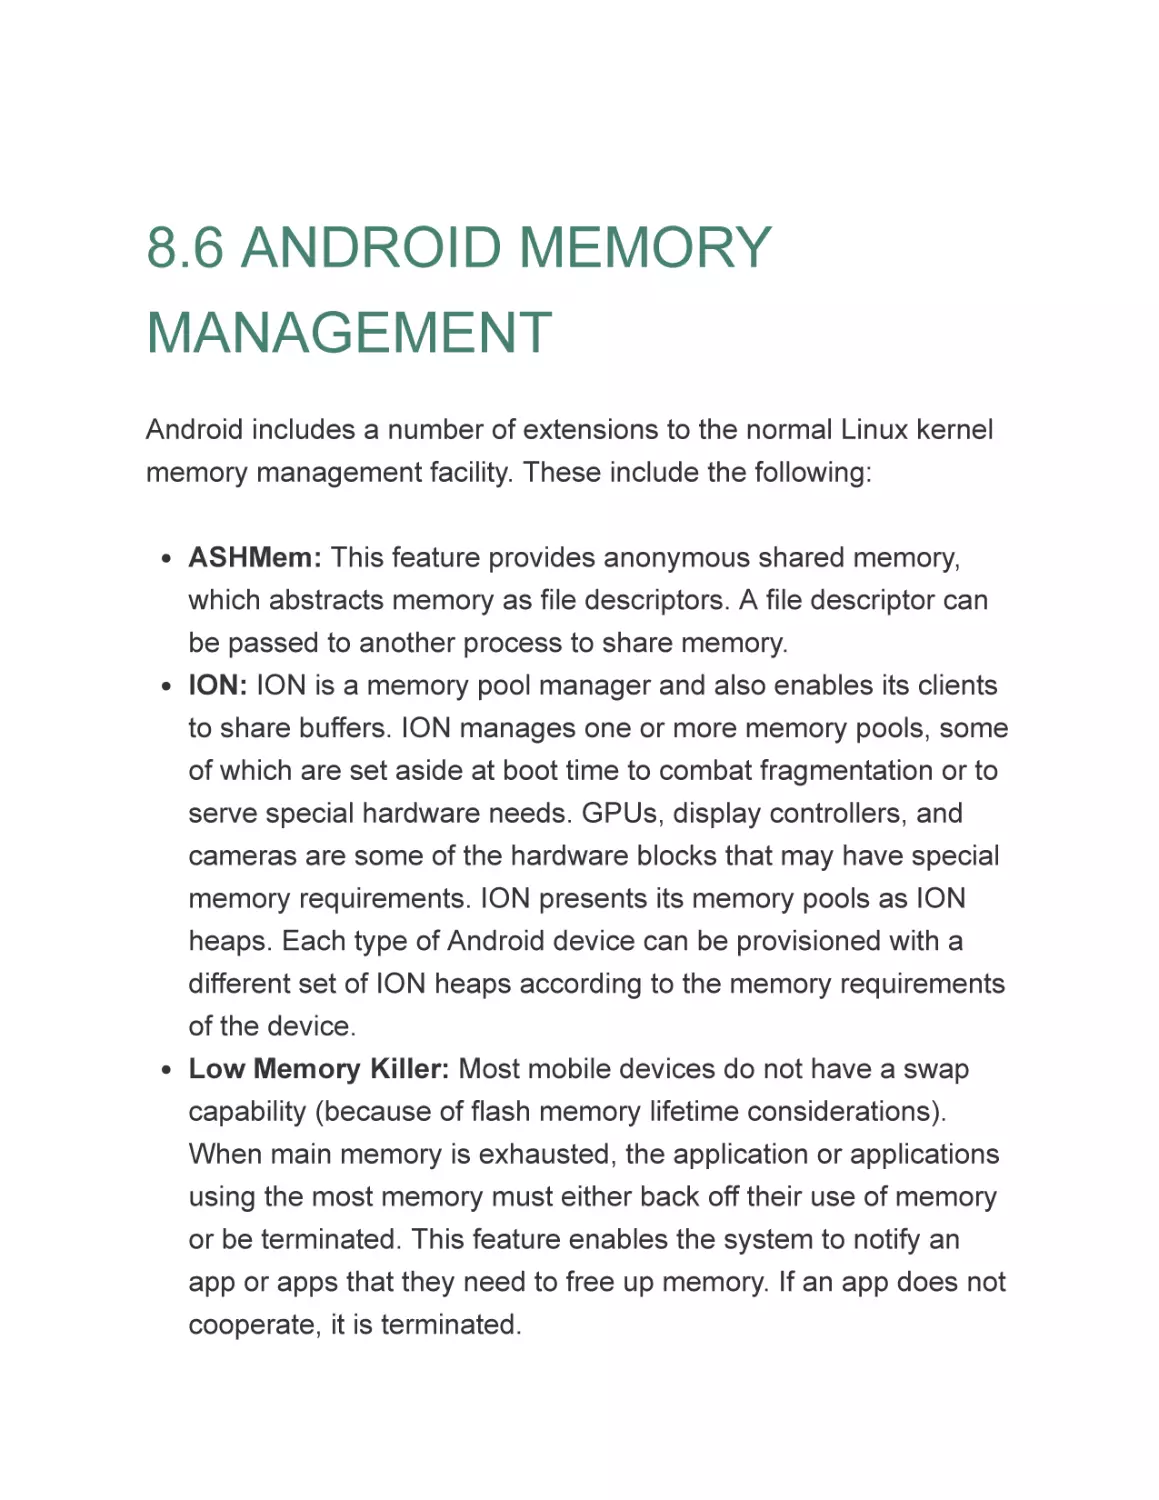 8.6 ANDROID MEMORY MANAGEMENT